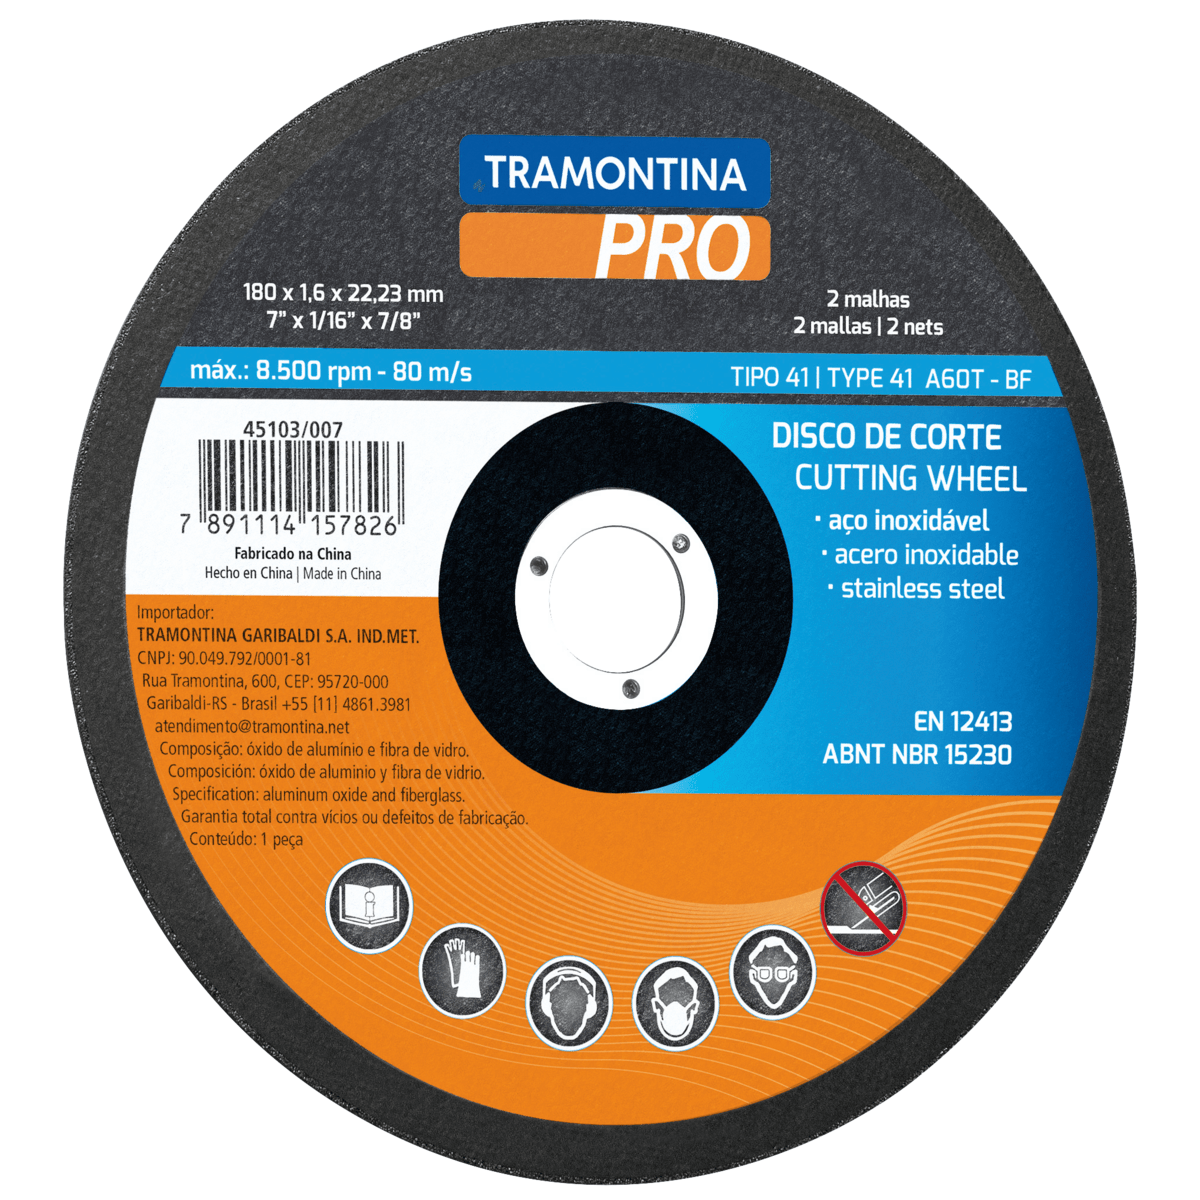 Tramontina 7" Cutting Wheel for Stainless Steel | Supply Master | Accra, Ghana Tools 1.6 x 22.23mm Building Steel Engineering Hardware tool